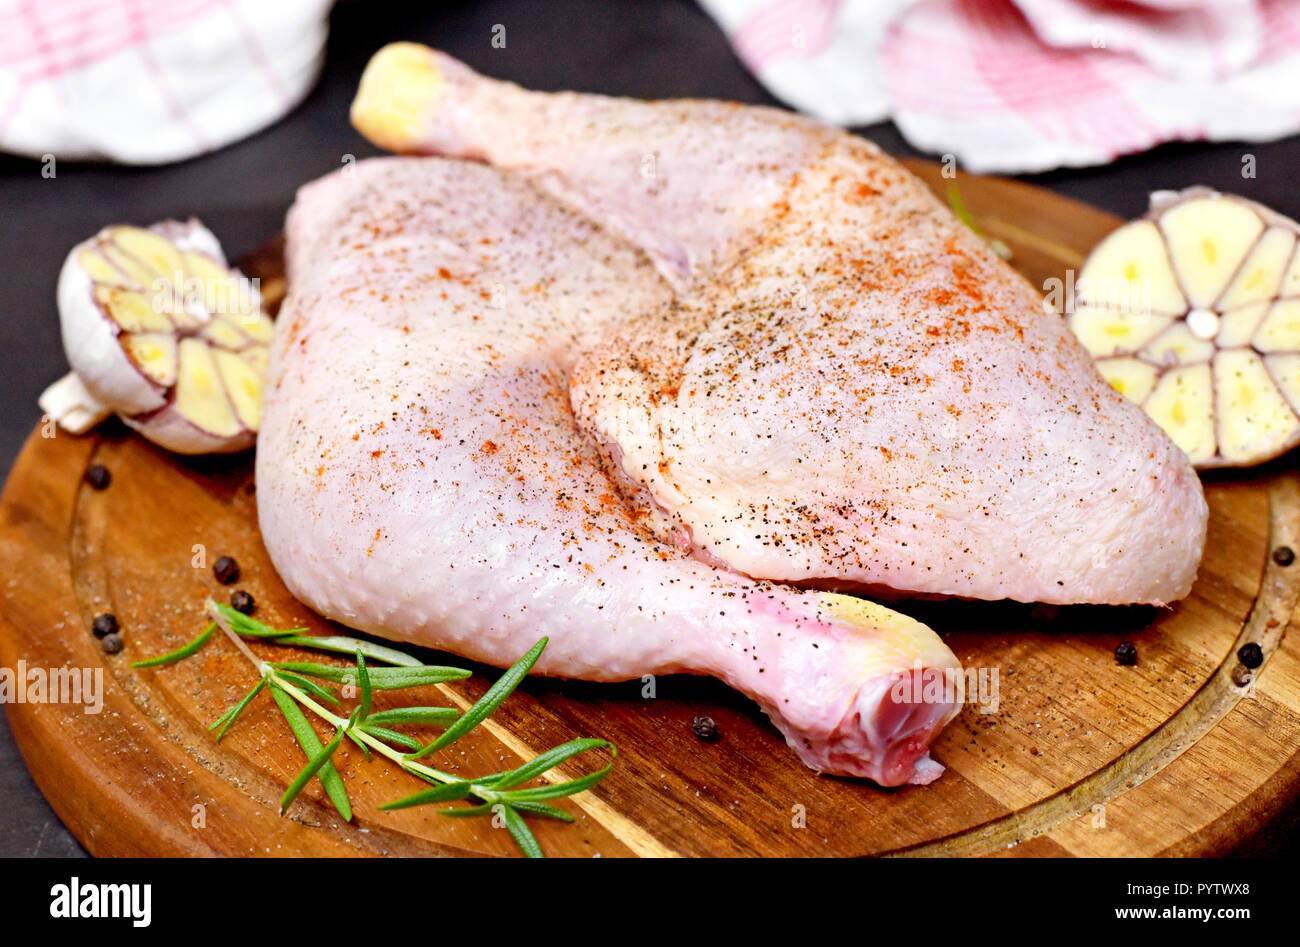 Delicious raw chicken legs or drumsticks on a wooden cutting board. Rustic preparation scene with garlic and raw meat. Stock Photo